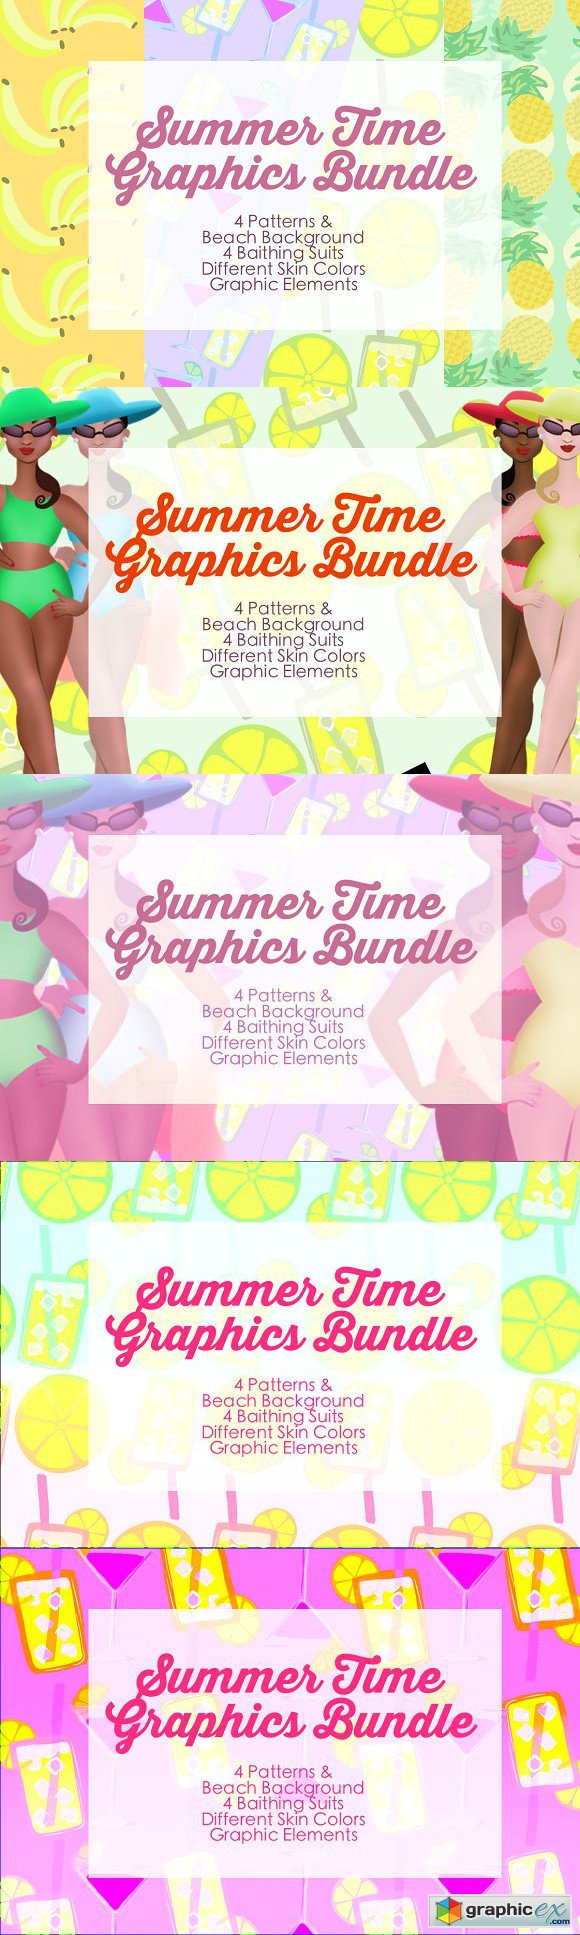 Summer Time Graphic Bundle